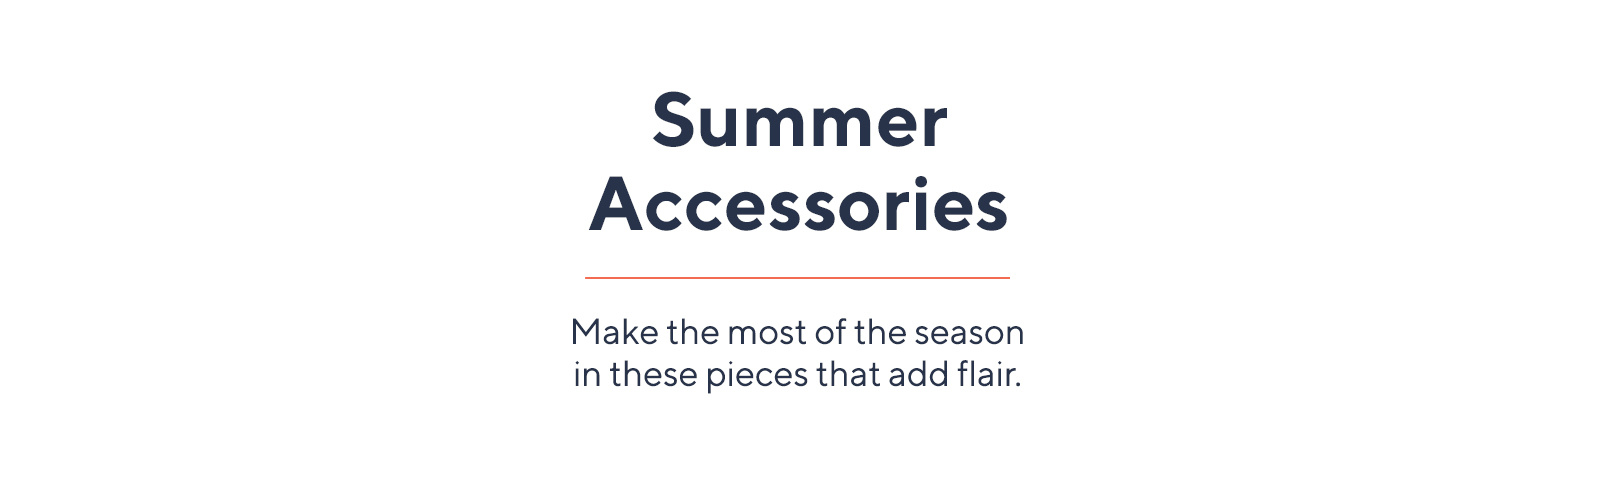 Summer Accessories.  Make the most of the season in these pieces that add flair.